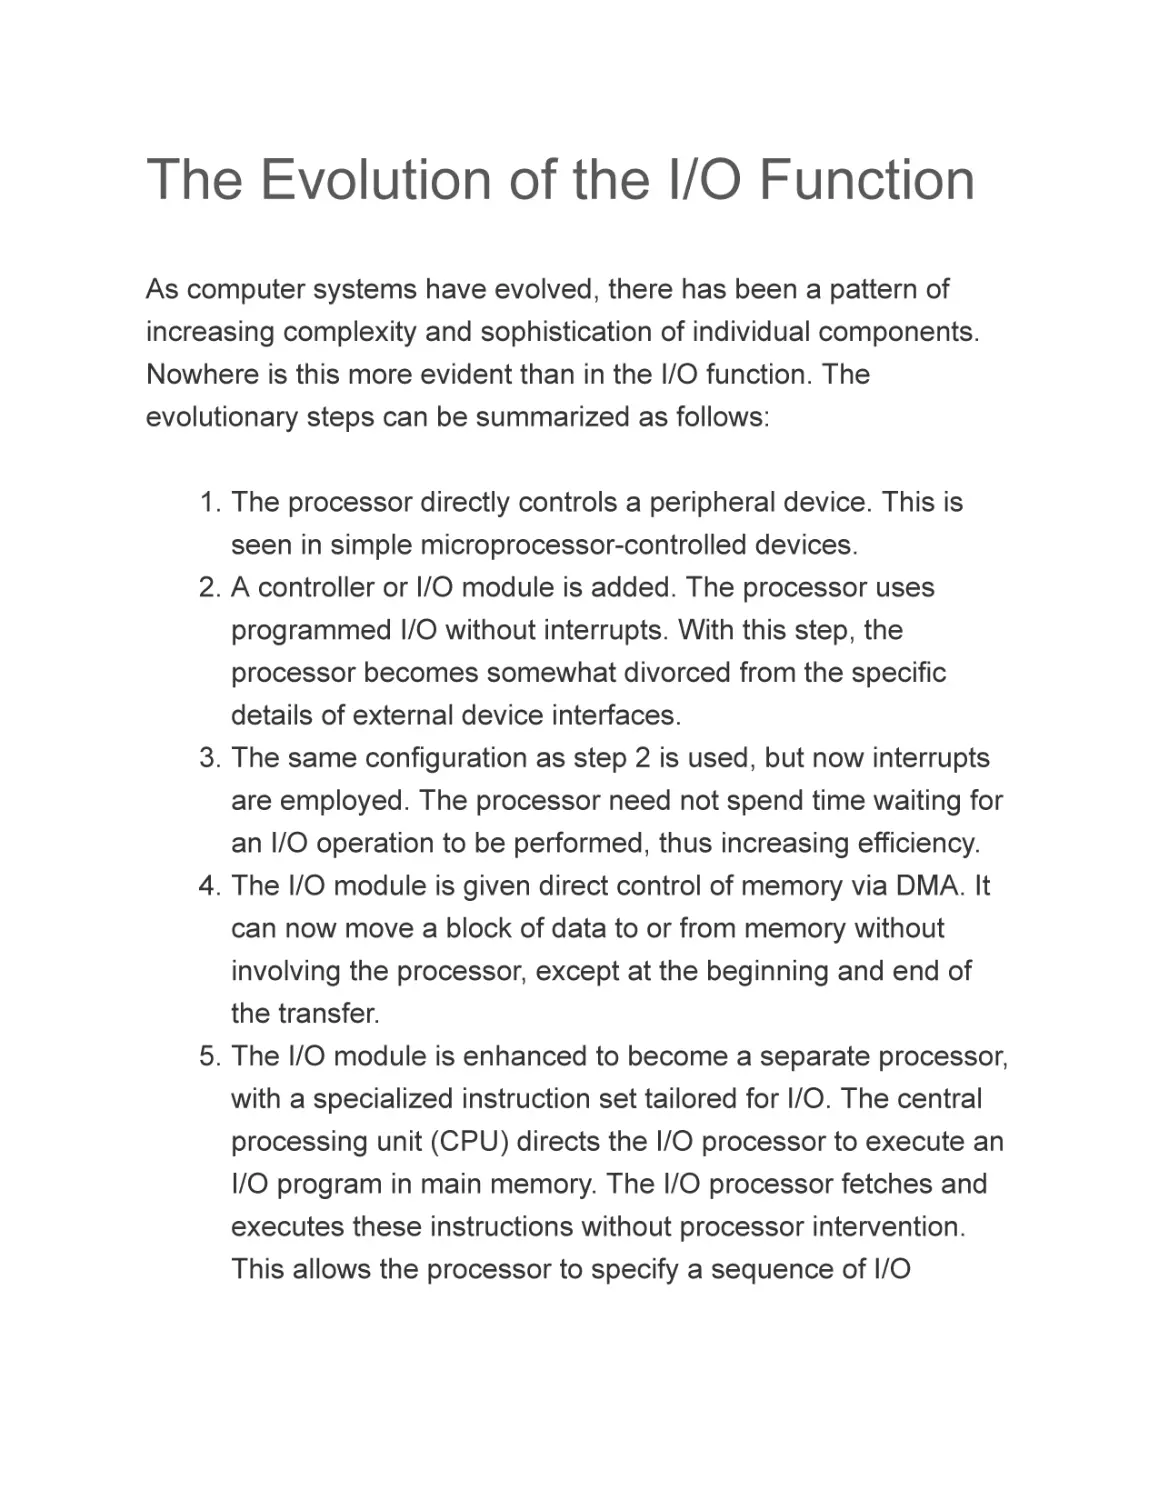 The Evolution of the I/O Function